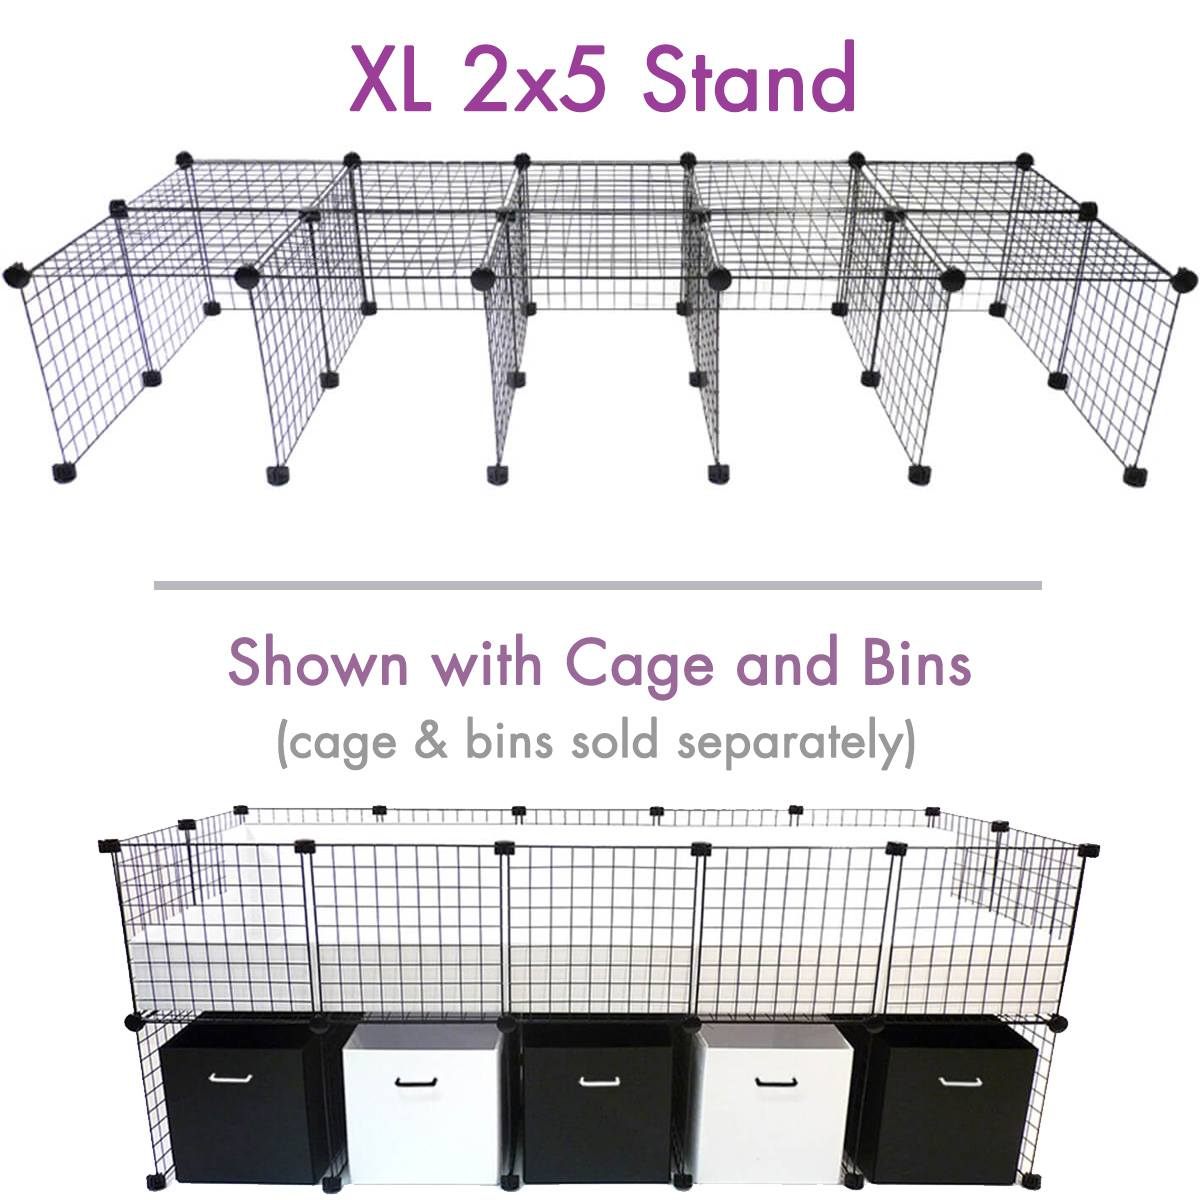 guinea pig cage stand 120